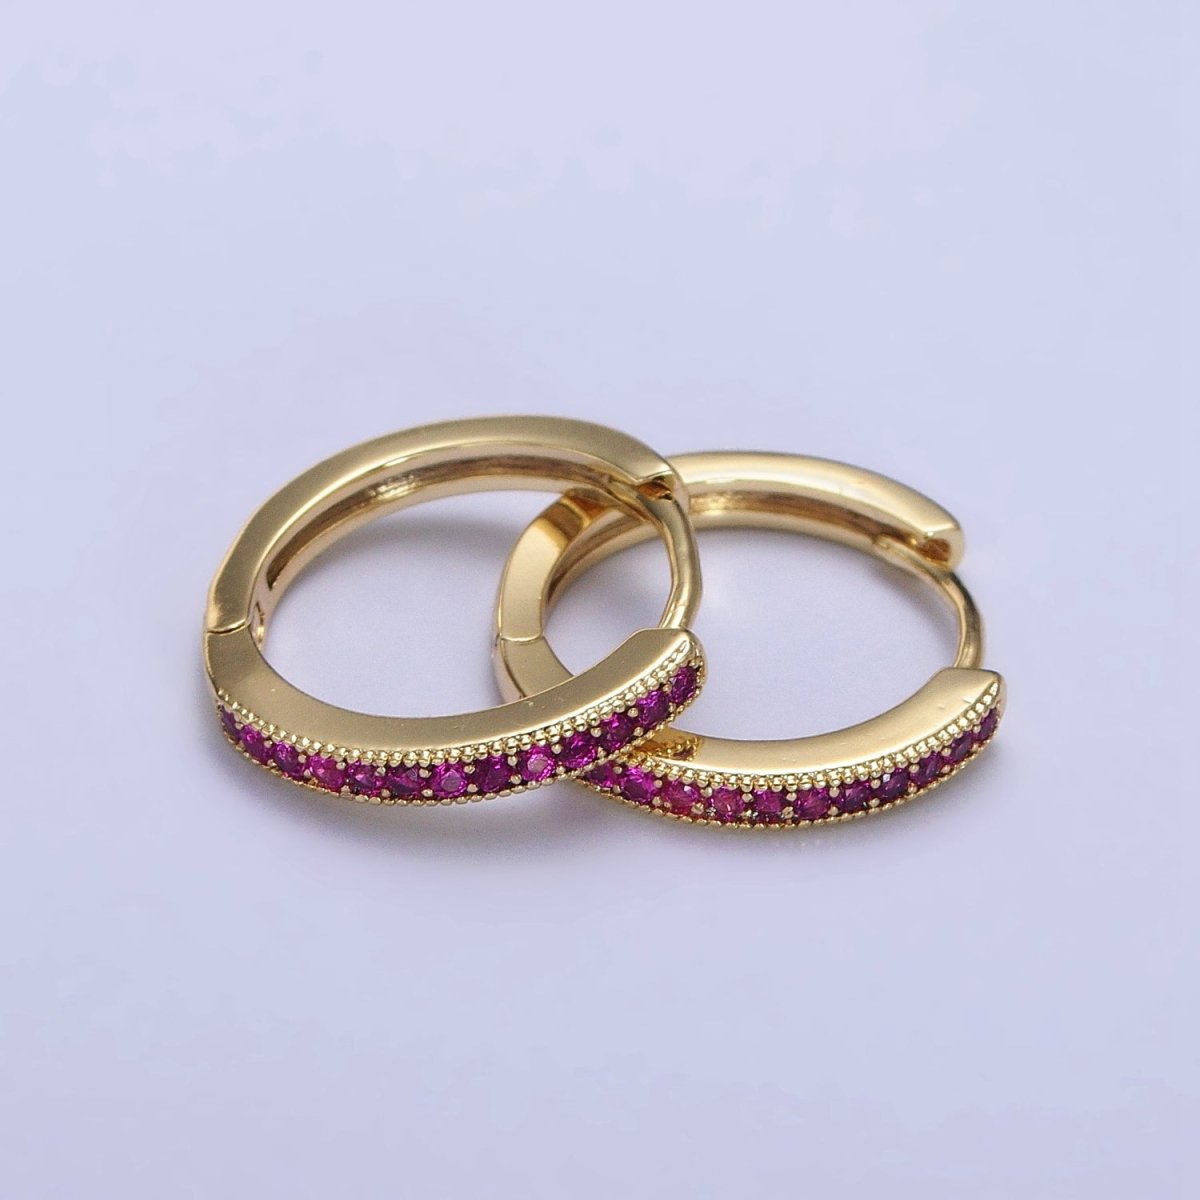 24K Gold Filled Green, Fuchsia, Black Micro Paved CZ Lined 16mm Huggie Earrings | AB297 AB298 AB299 - DLUXCA